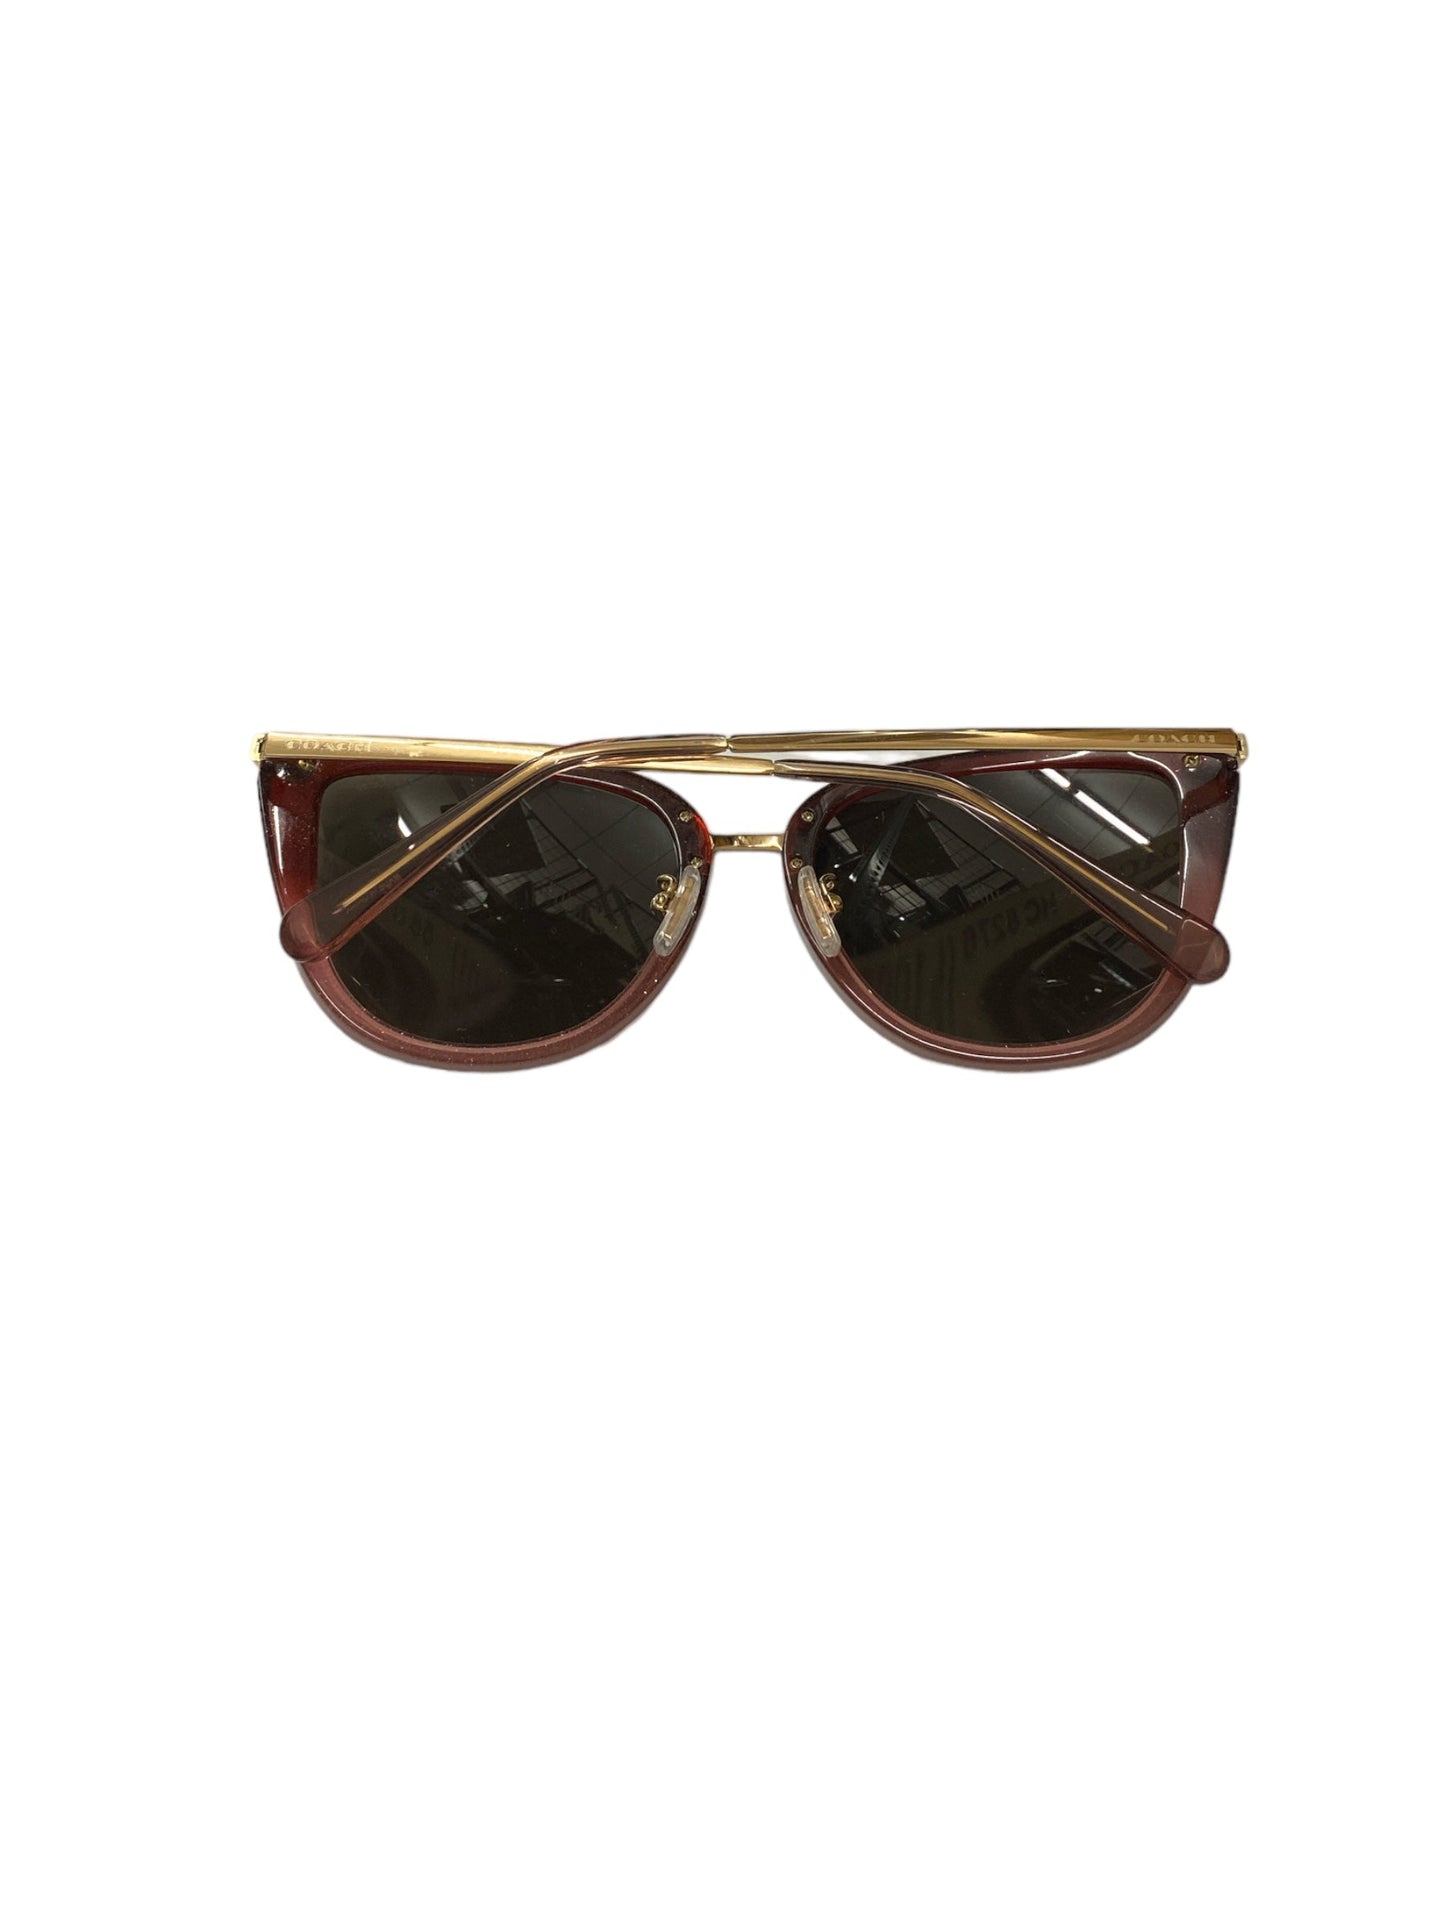 Sunglasses By Coach